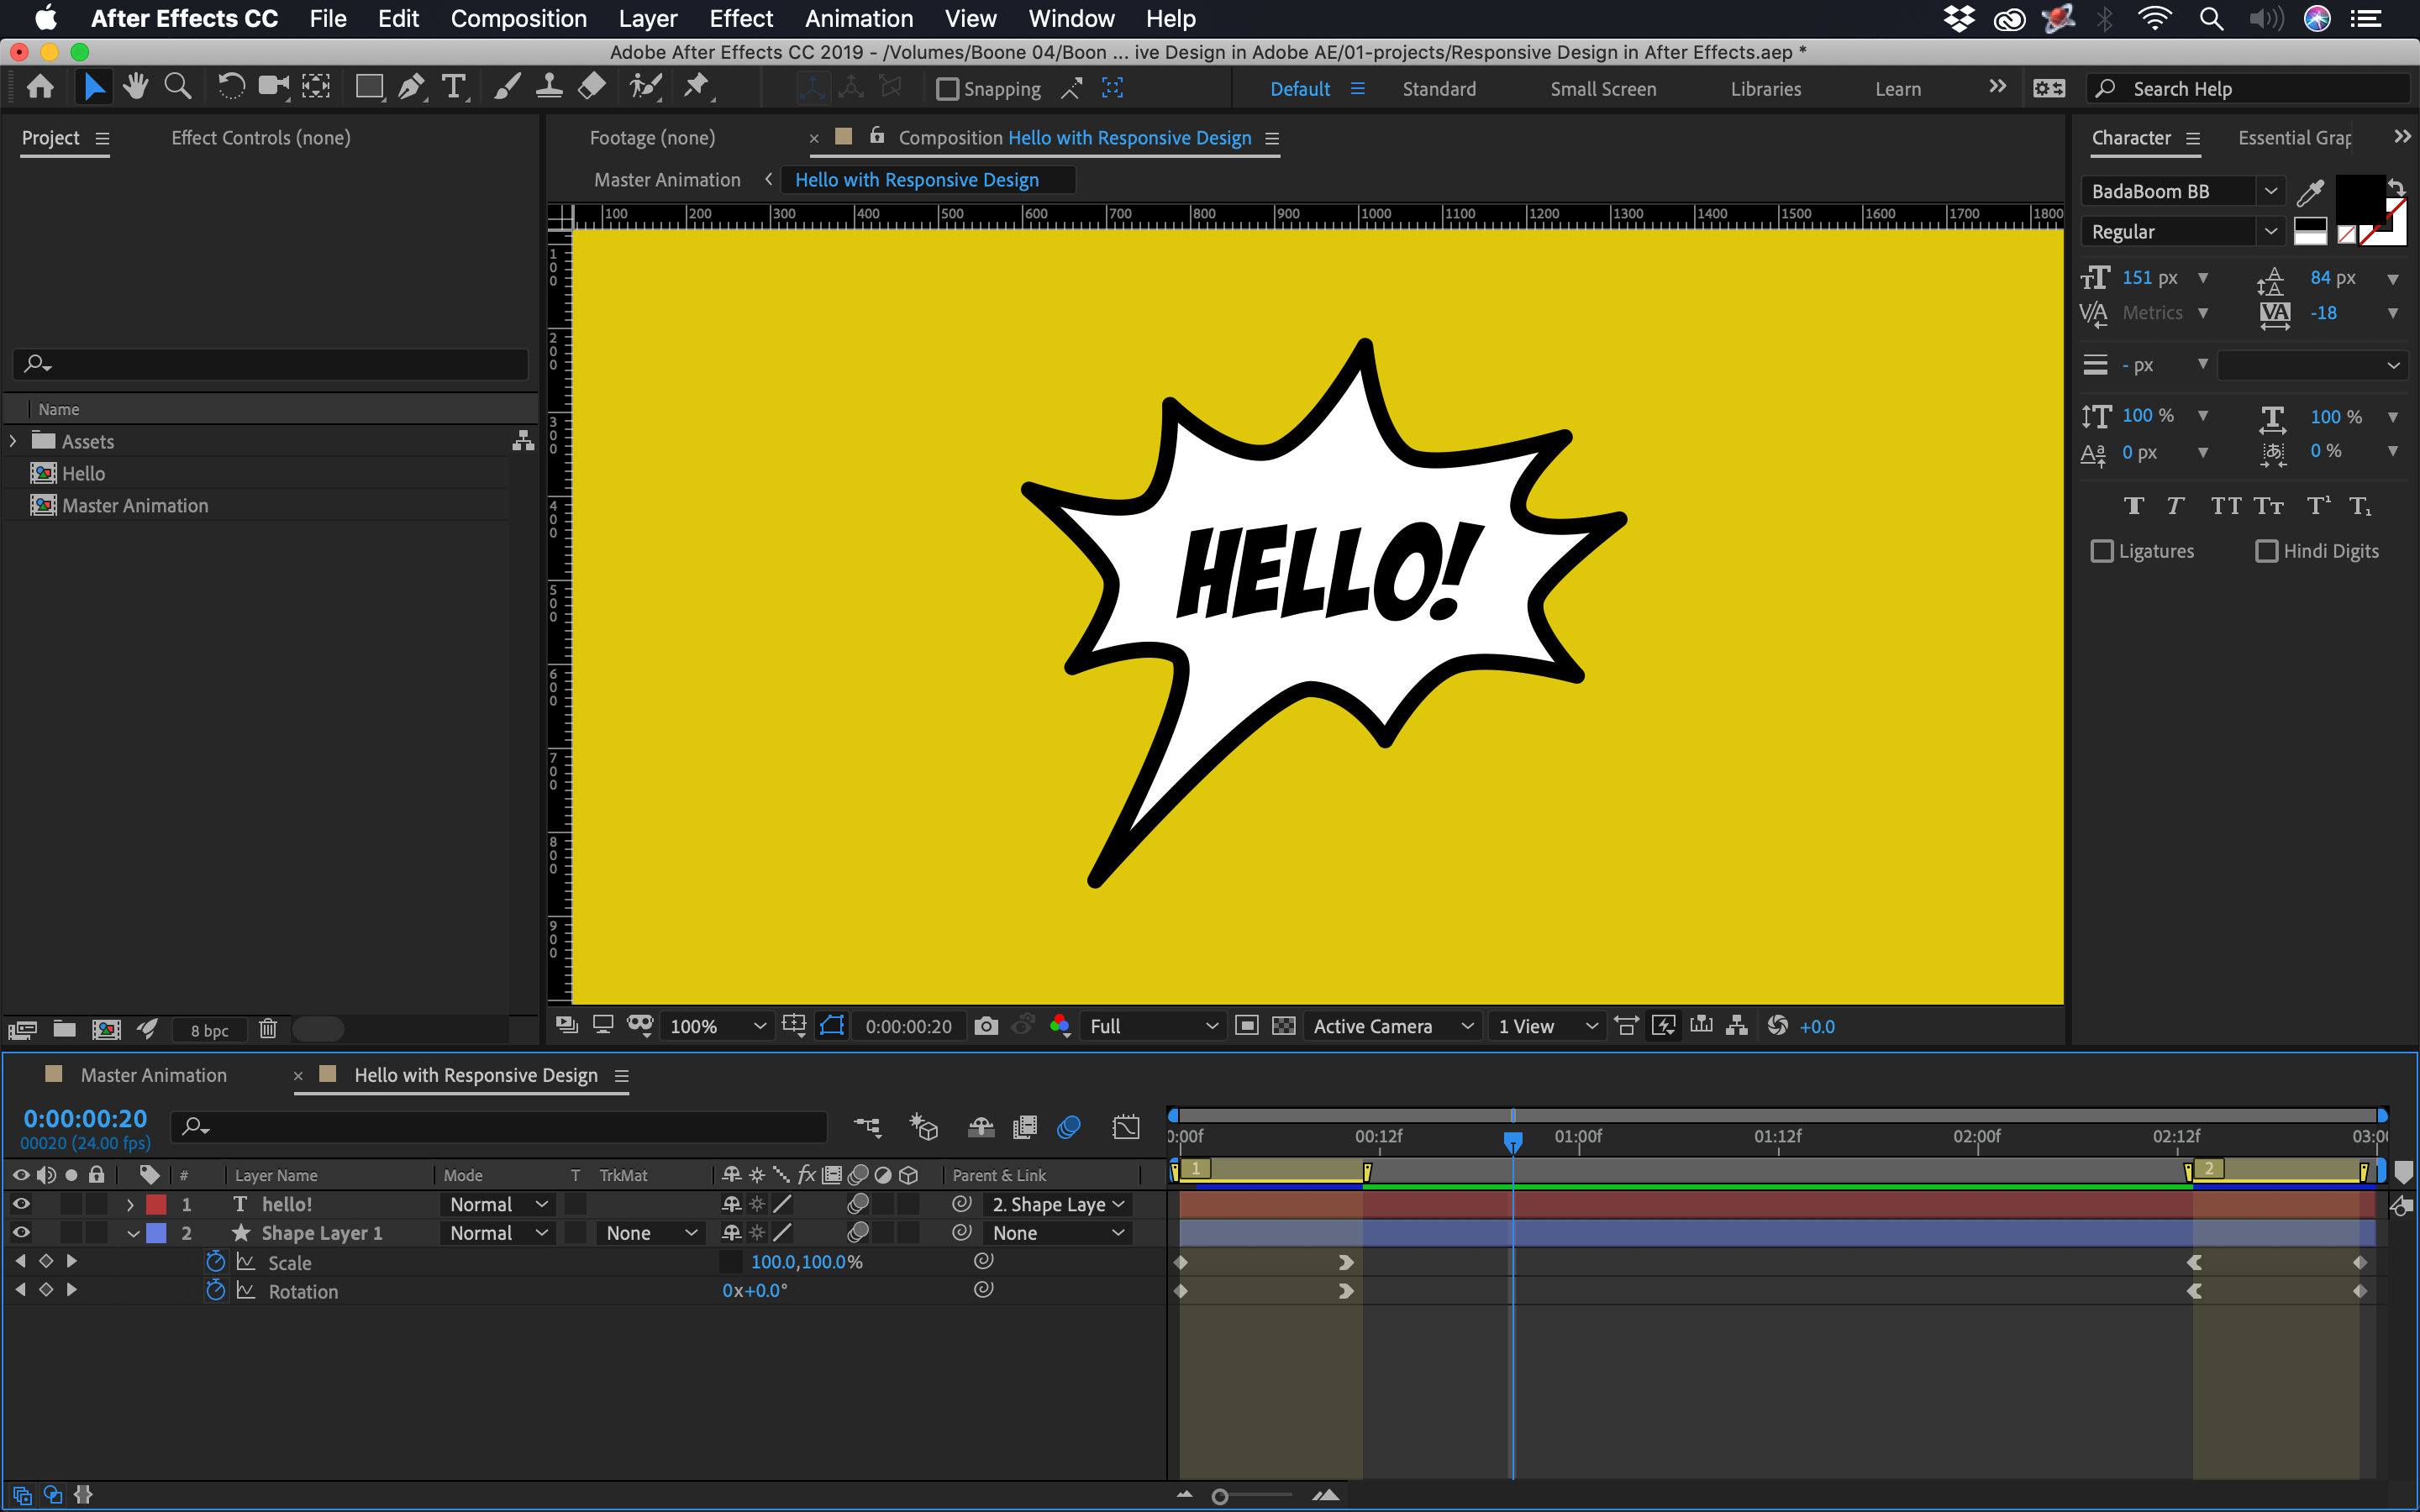 How to Use the New Responsive Design Feature in After Effects 2019